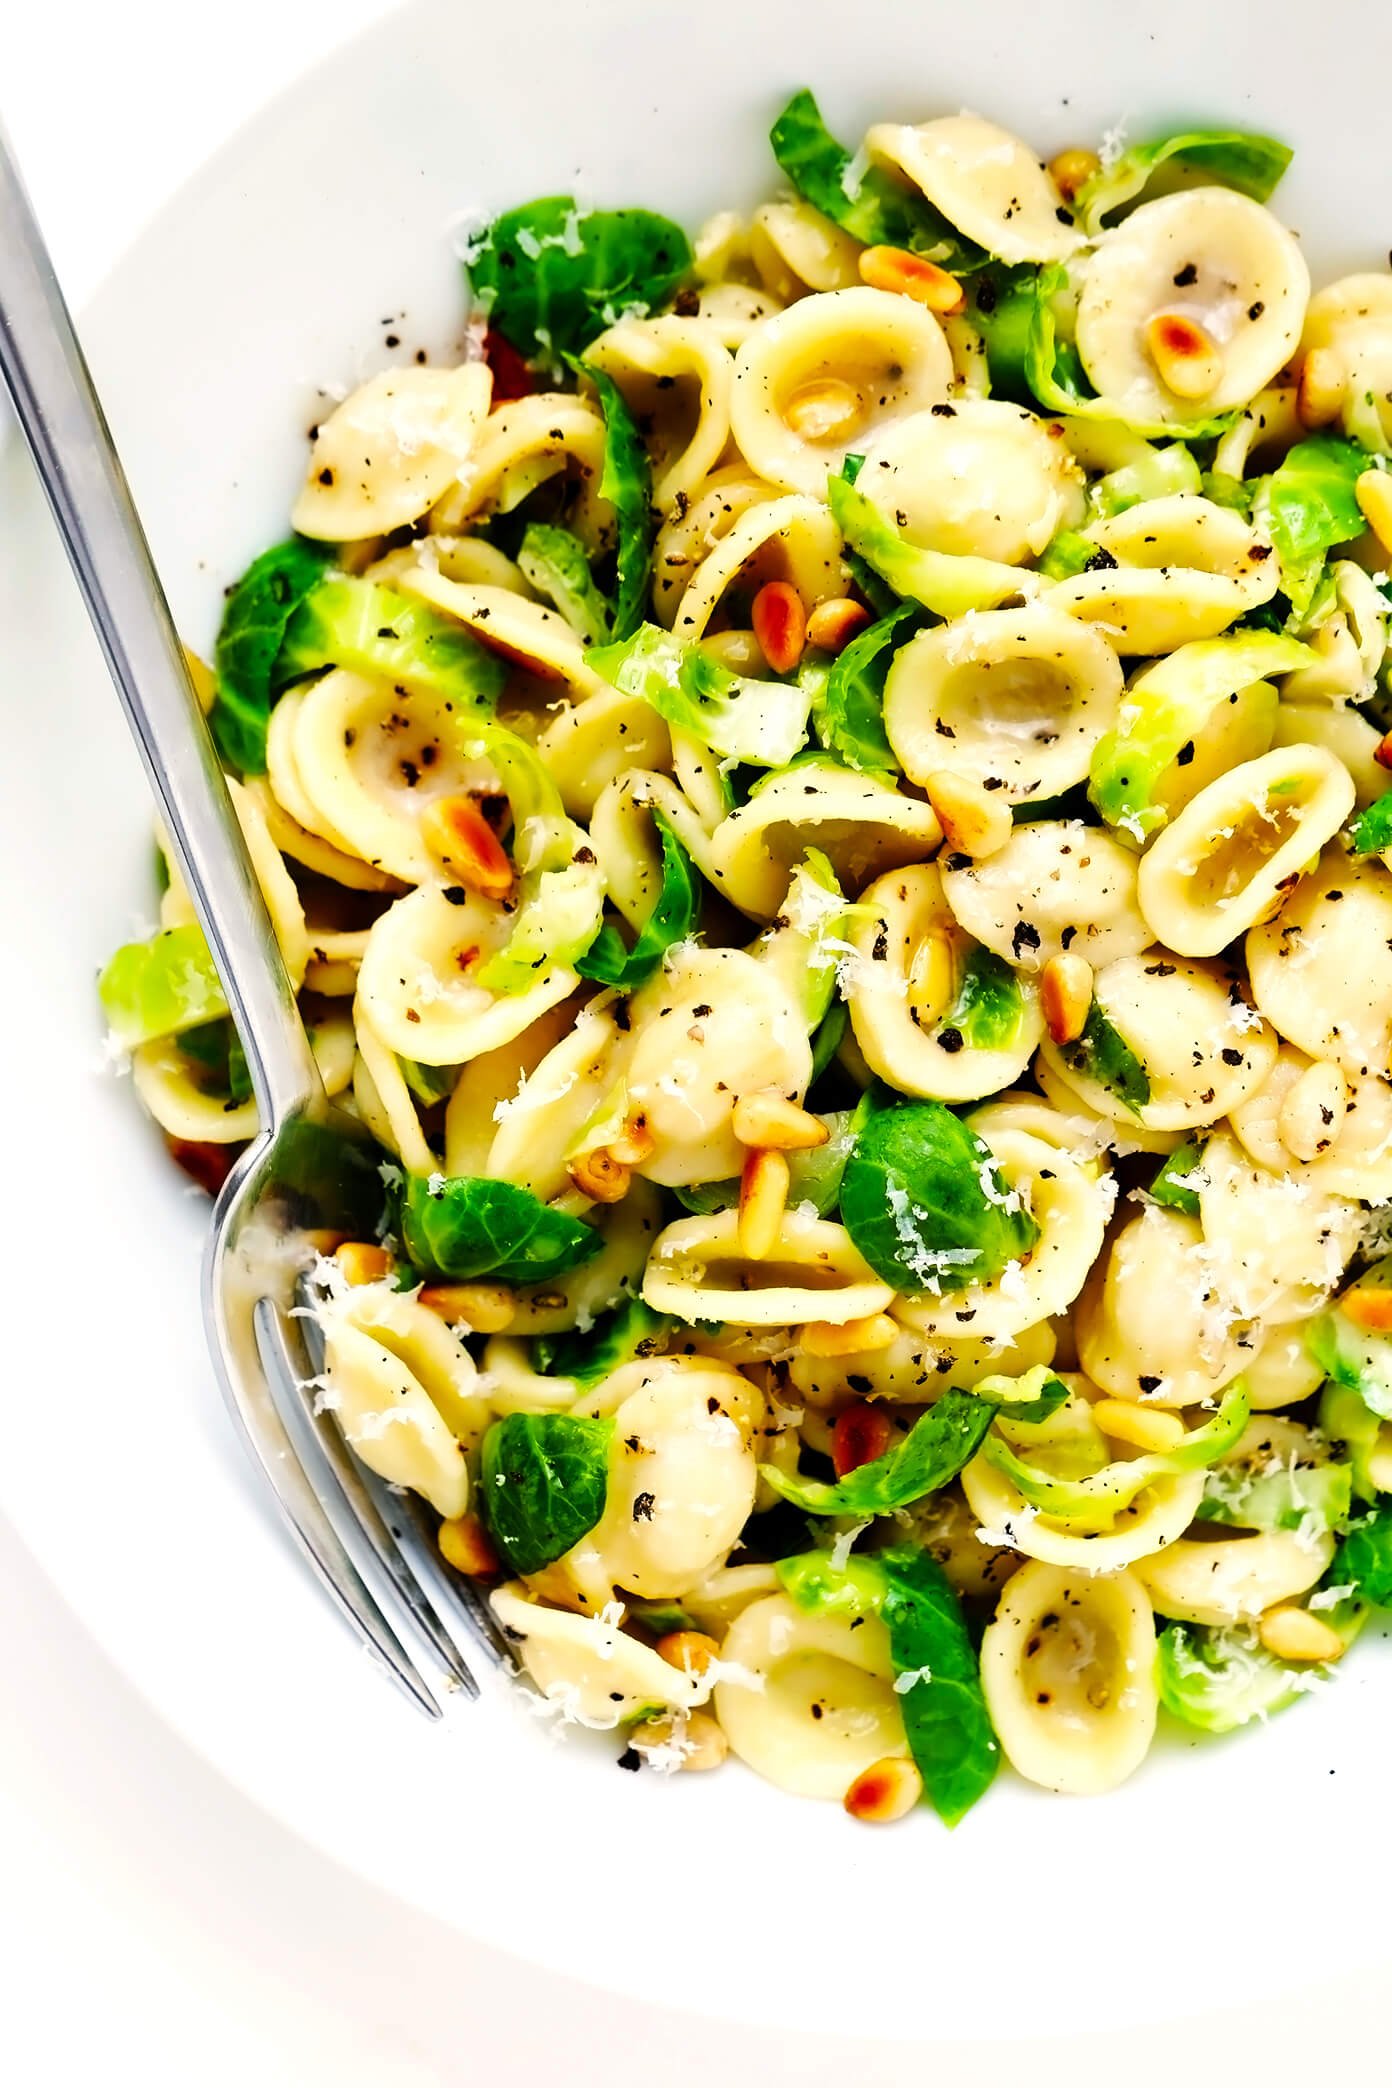 https://www.gimmesomeoven.com/wp-content/uploads/2020/10/Brussels-Sprouts-Pasta-Recipe-with-Parmesan-and-Pine-Nuts-2-1.jpg